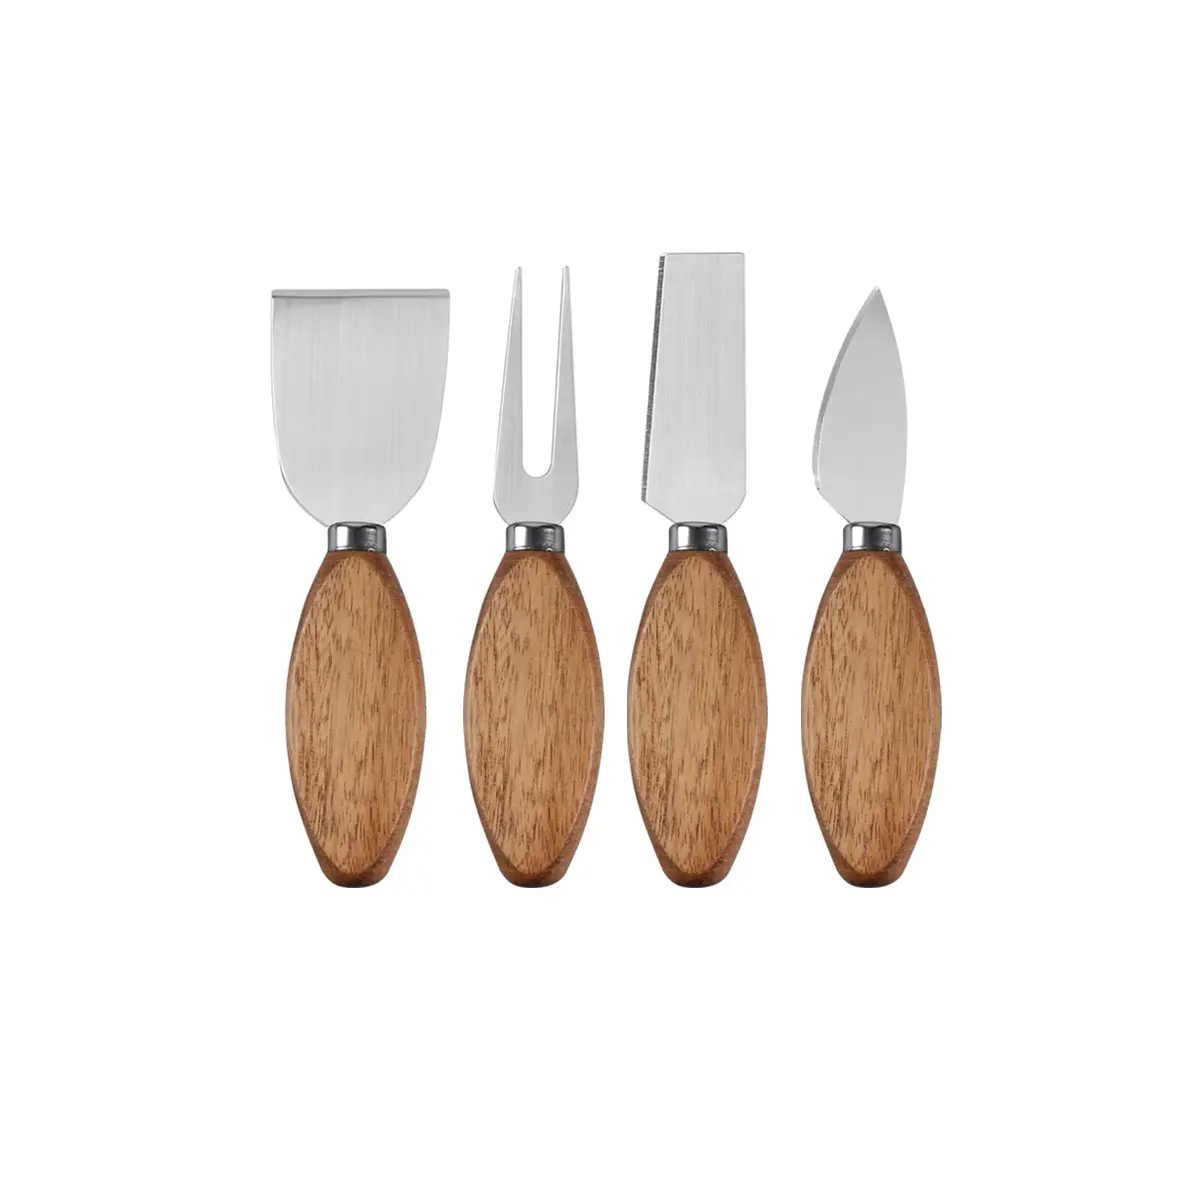 4pcs Unique Cheese Knife Tool Set Wood Bamboo Handle Stainless Steel Cheese Knife Set For Cheese Pizza